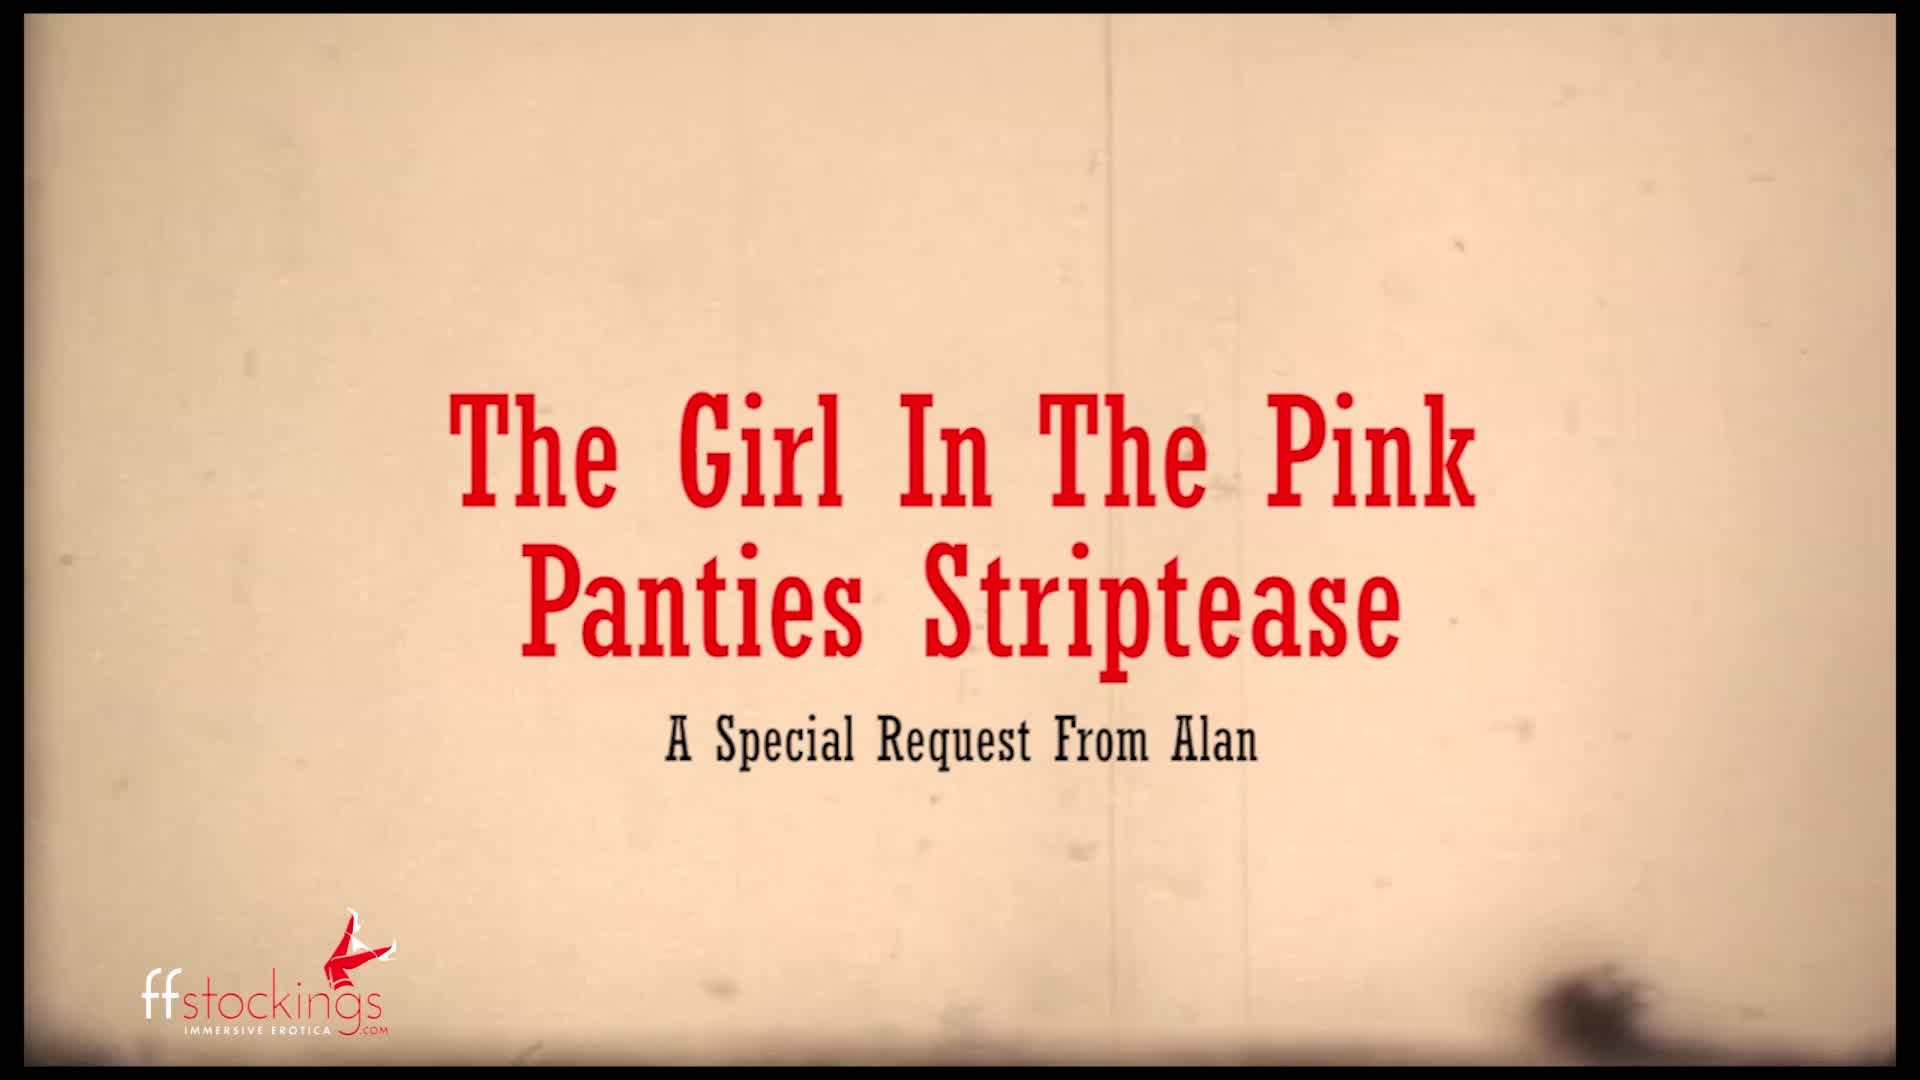 The Girl In The Pink Panties